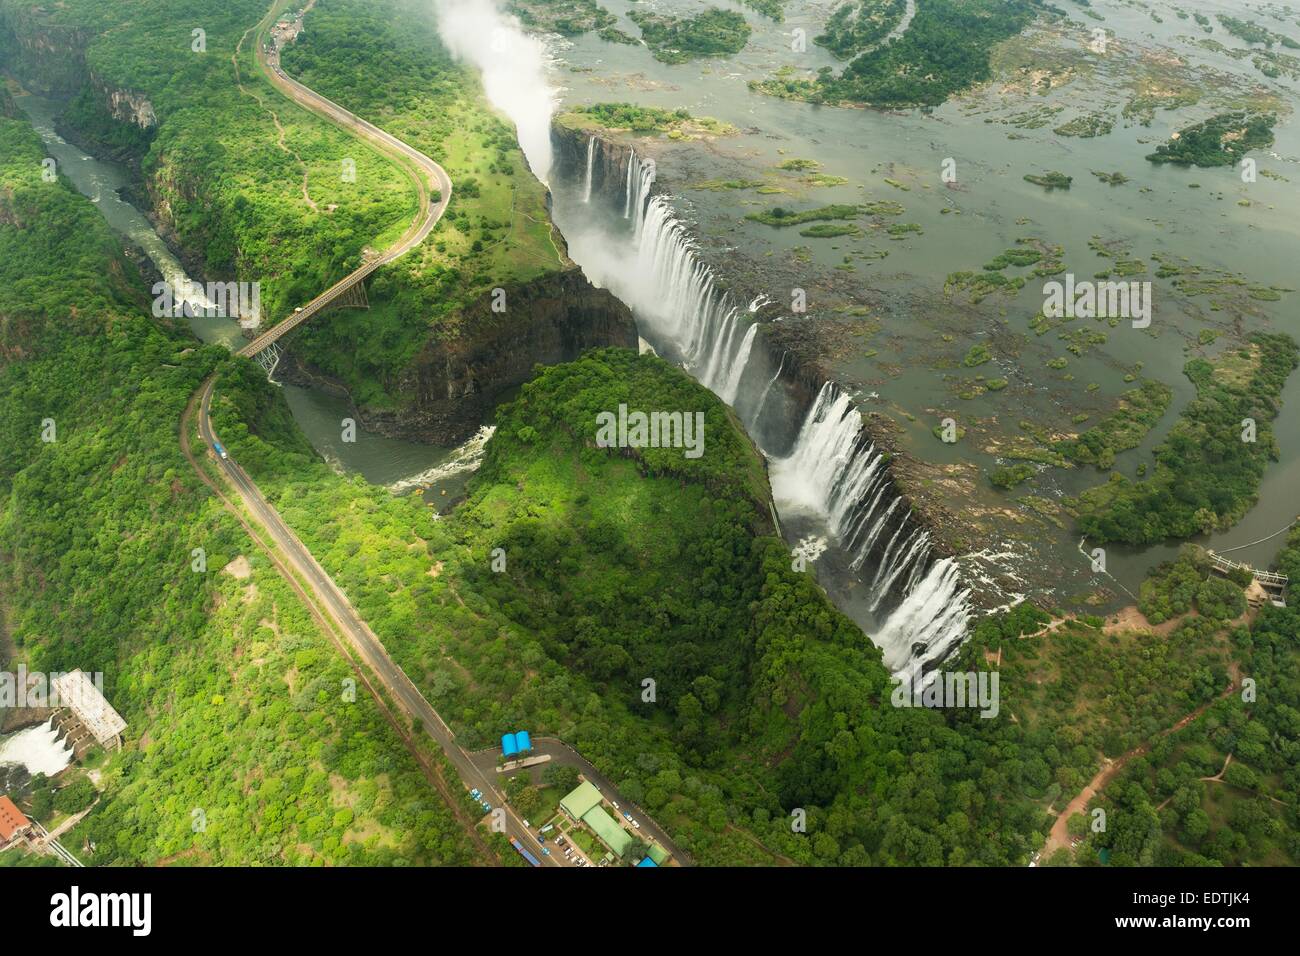 Aerial image of the Victoria Falls and the spray taken from the Zambian side and looking towards Zimbabwe, Africa. Stock Photo